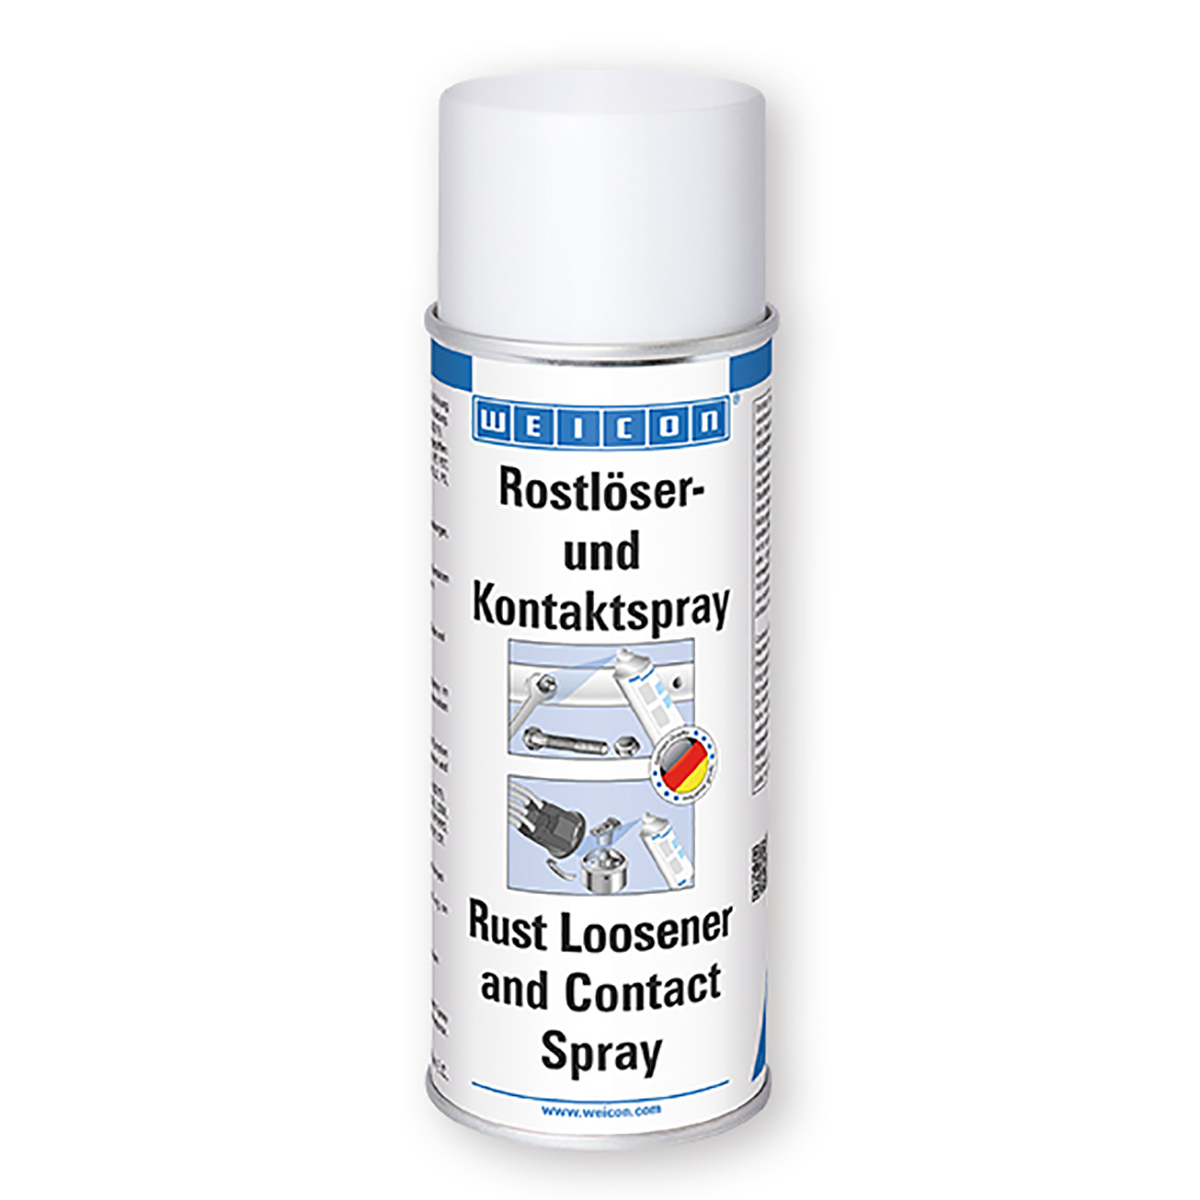 Weicon Rust Loosener and Contact Spray